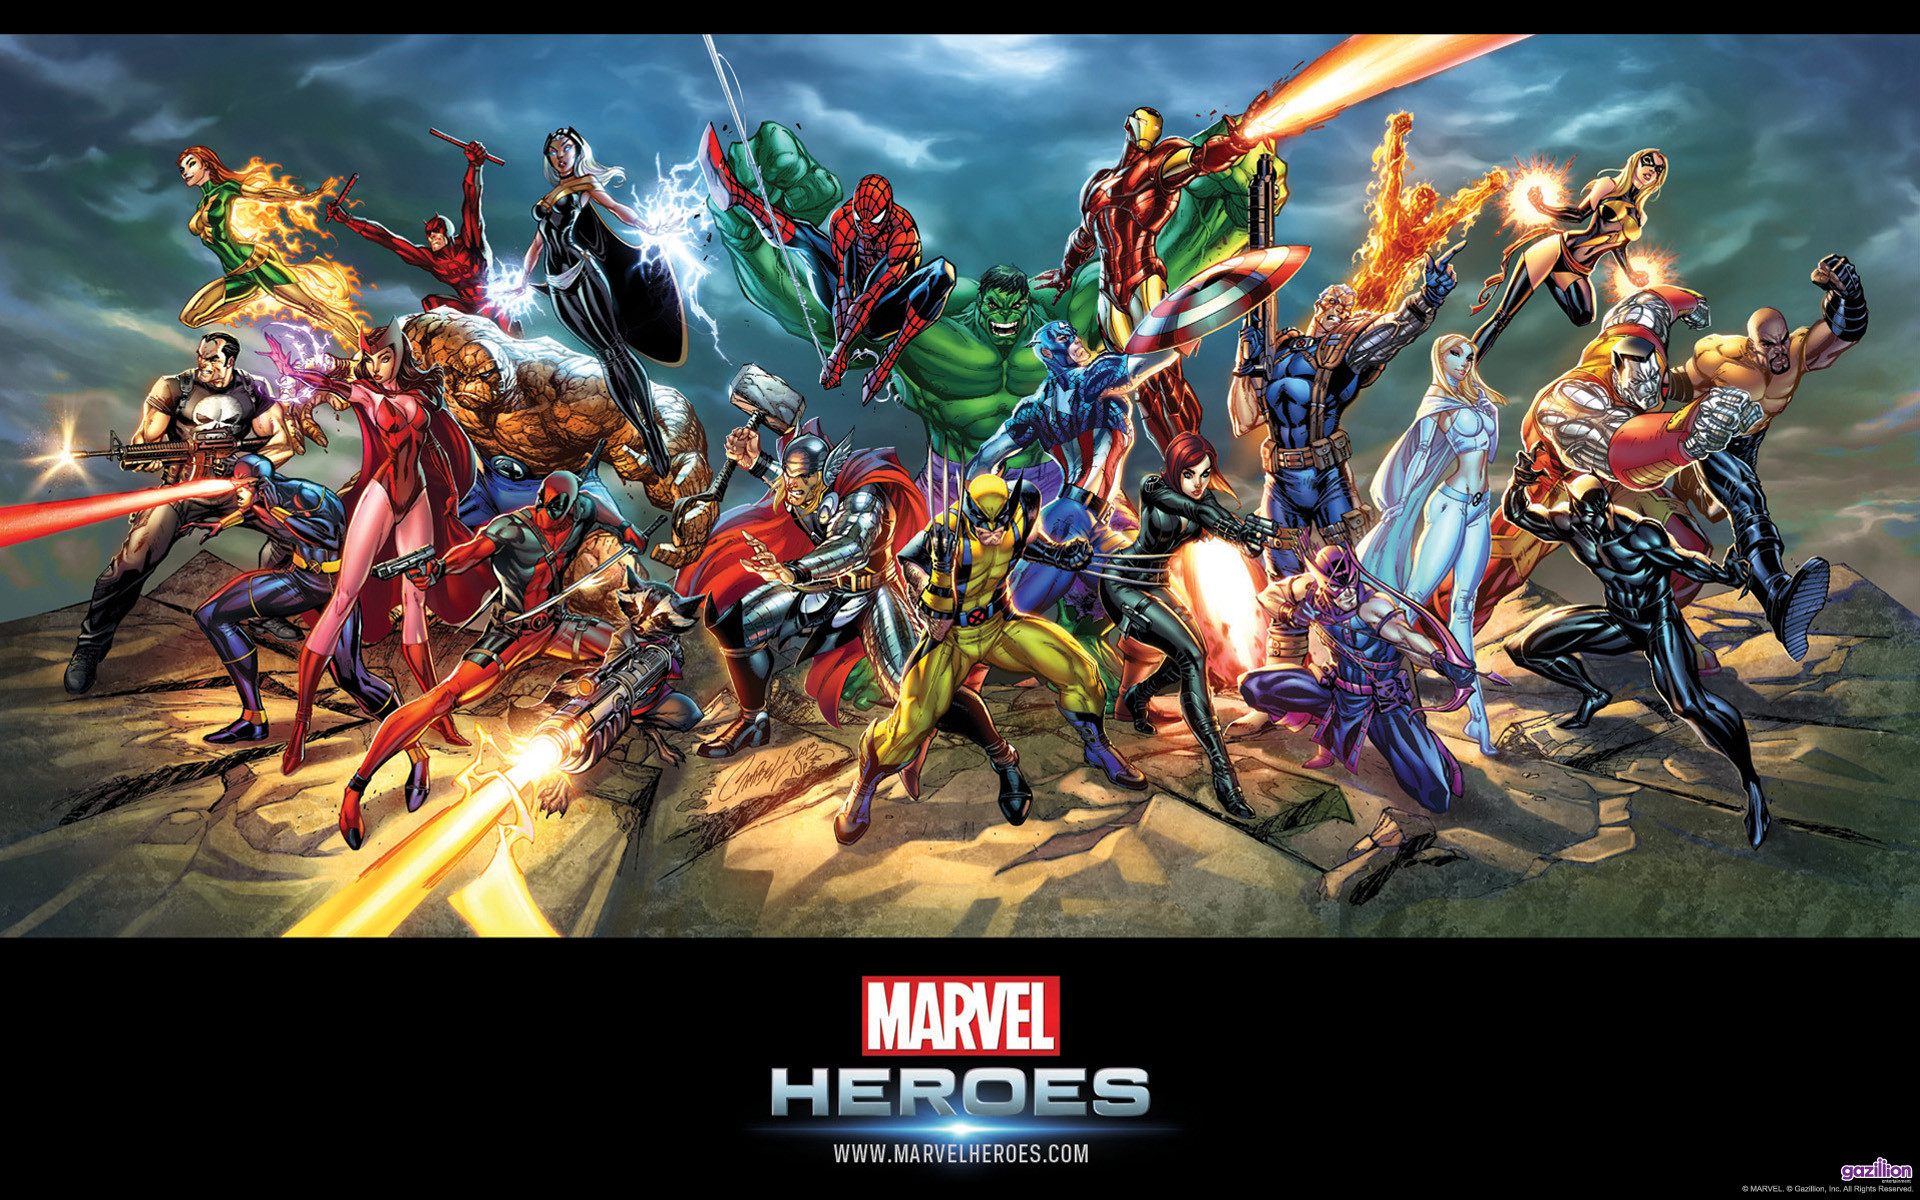 Marvel Heroes by Jeff Scott Campbell